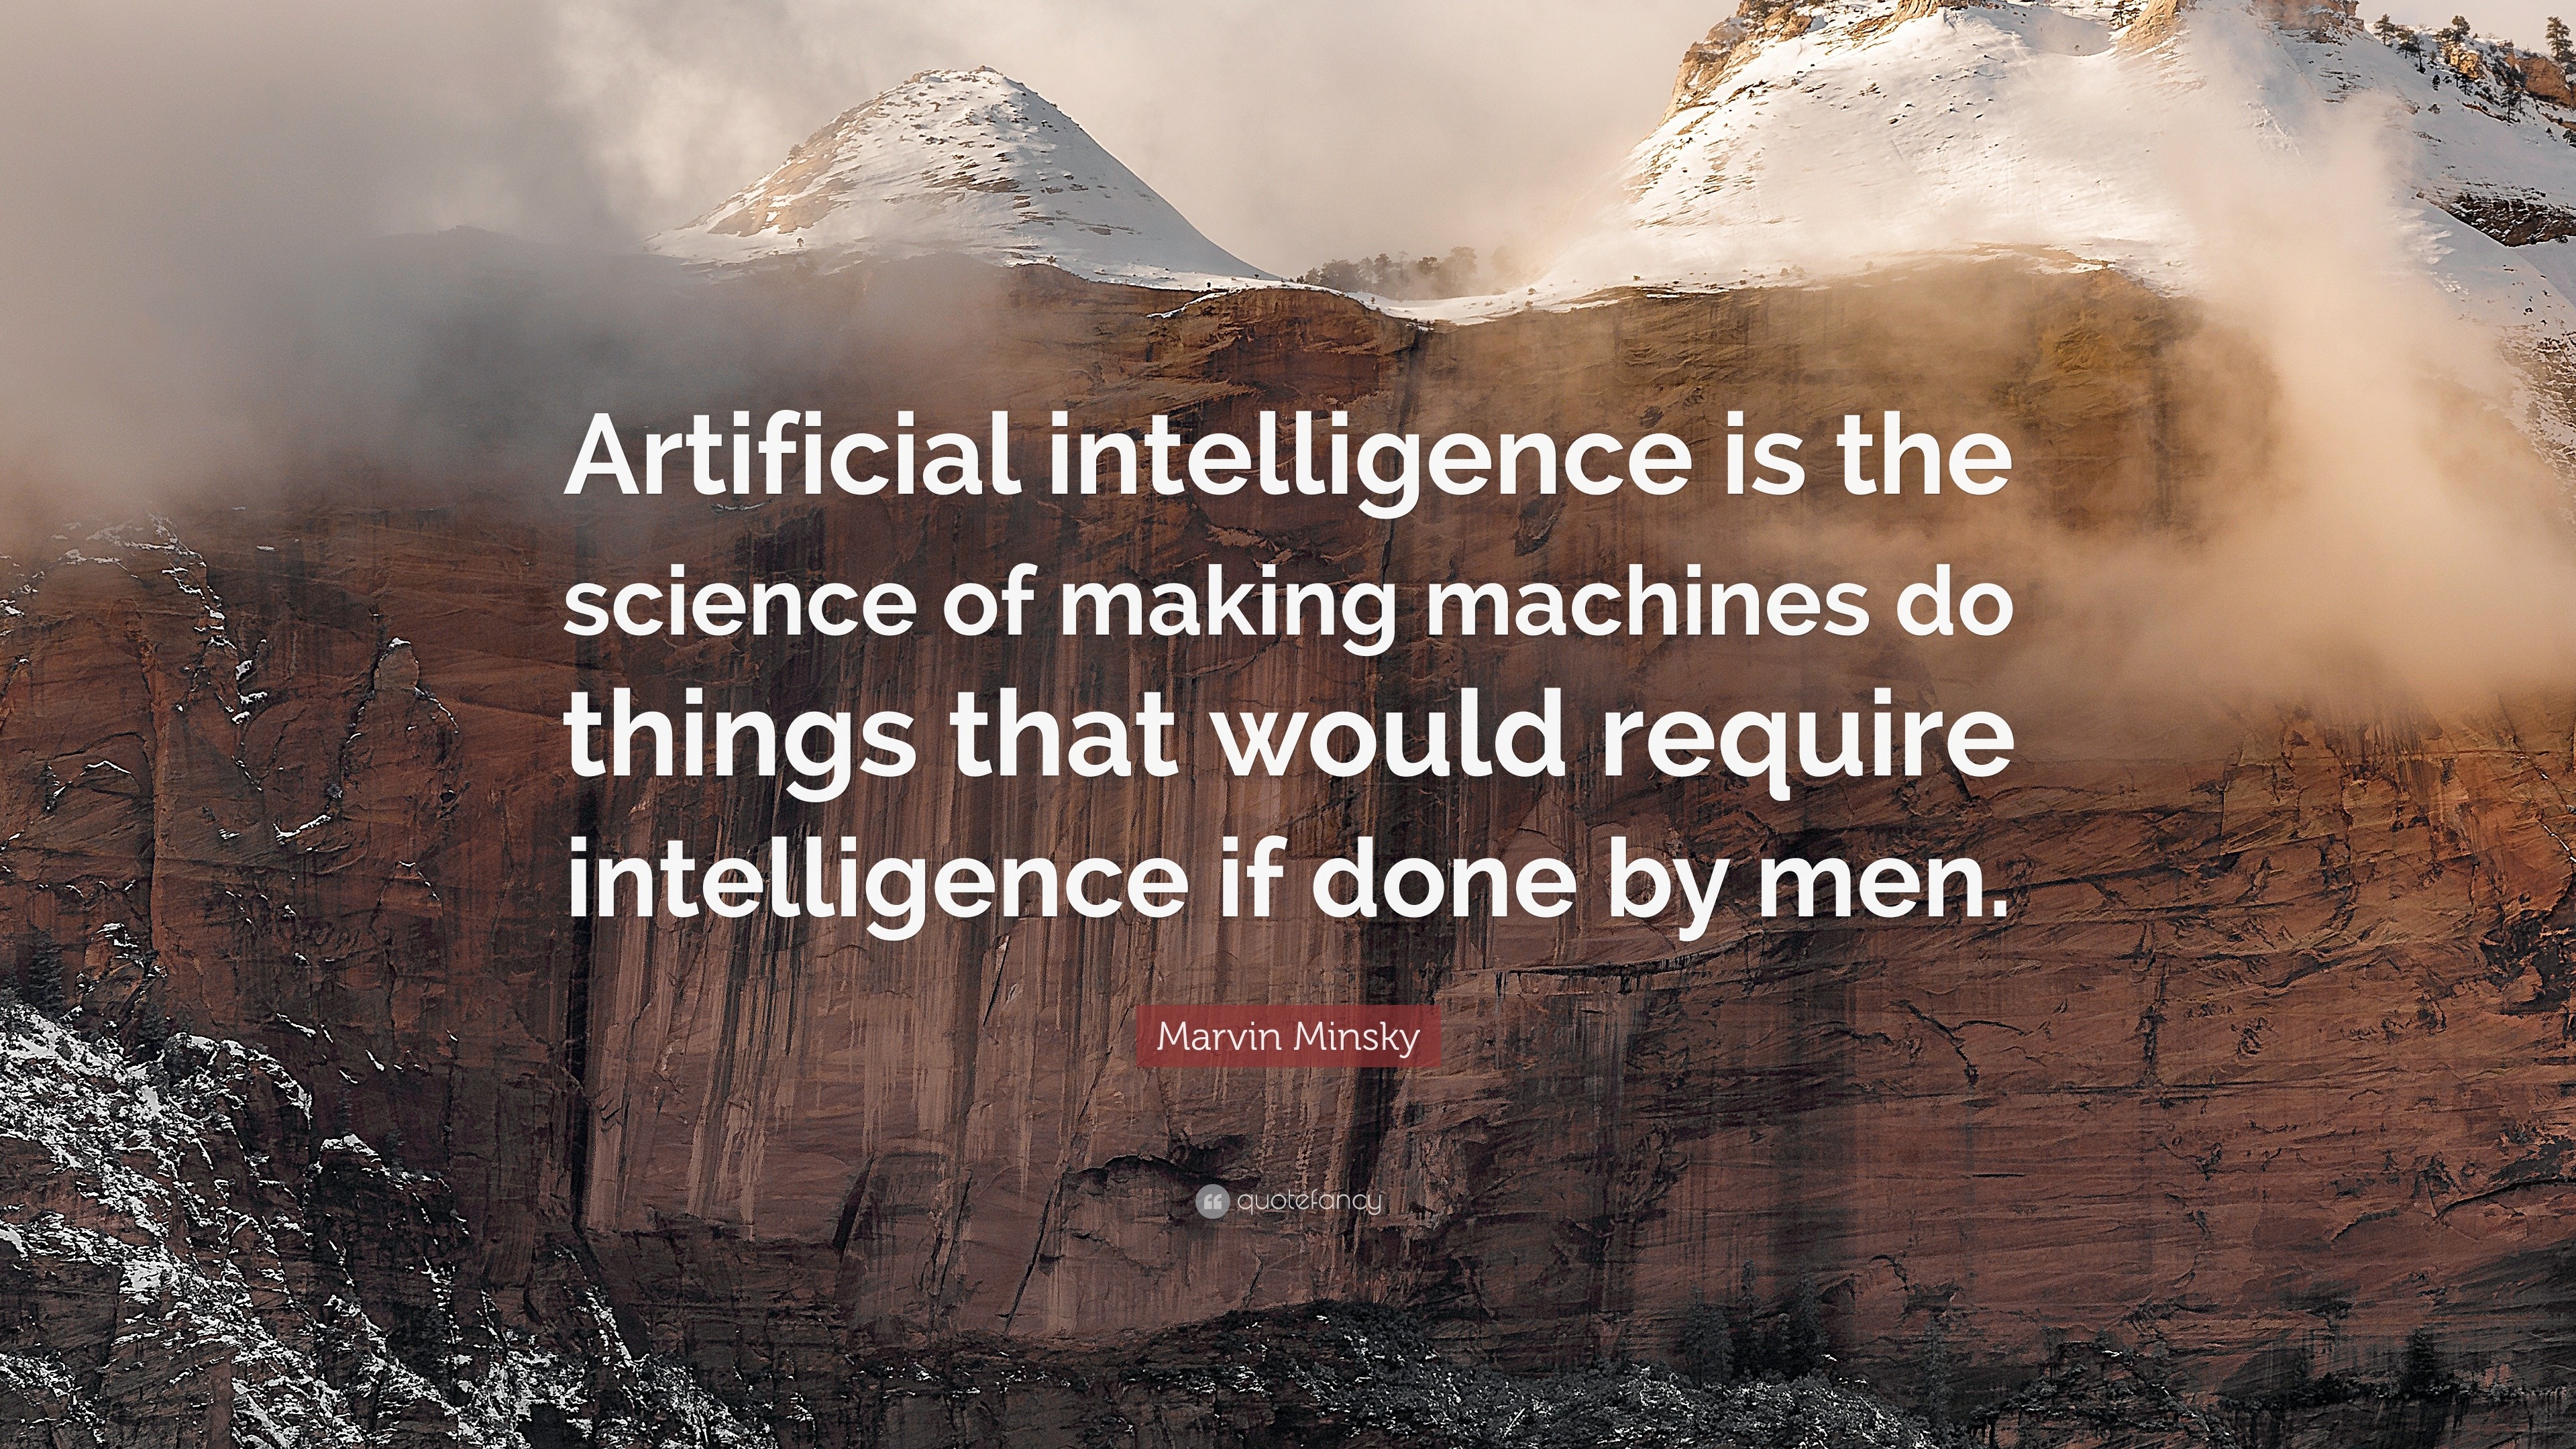 Marvin Minsky Quote: “Artificial intelligence is the science of making ...